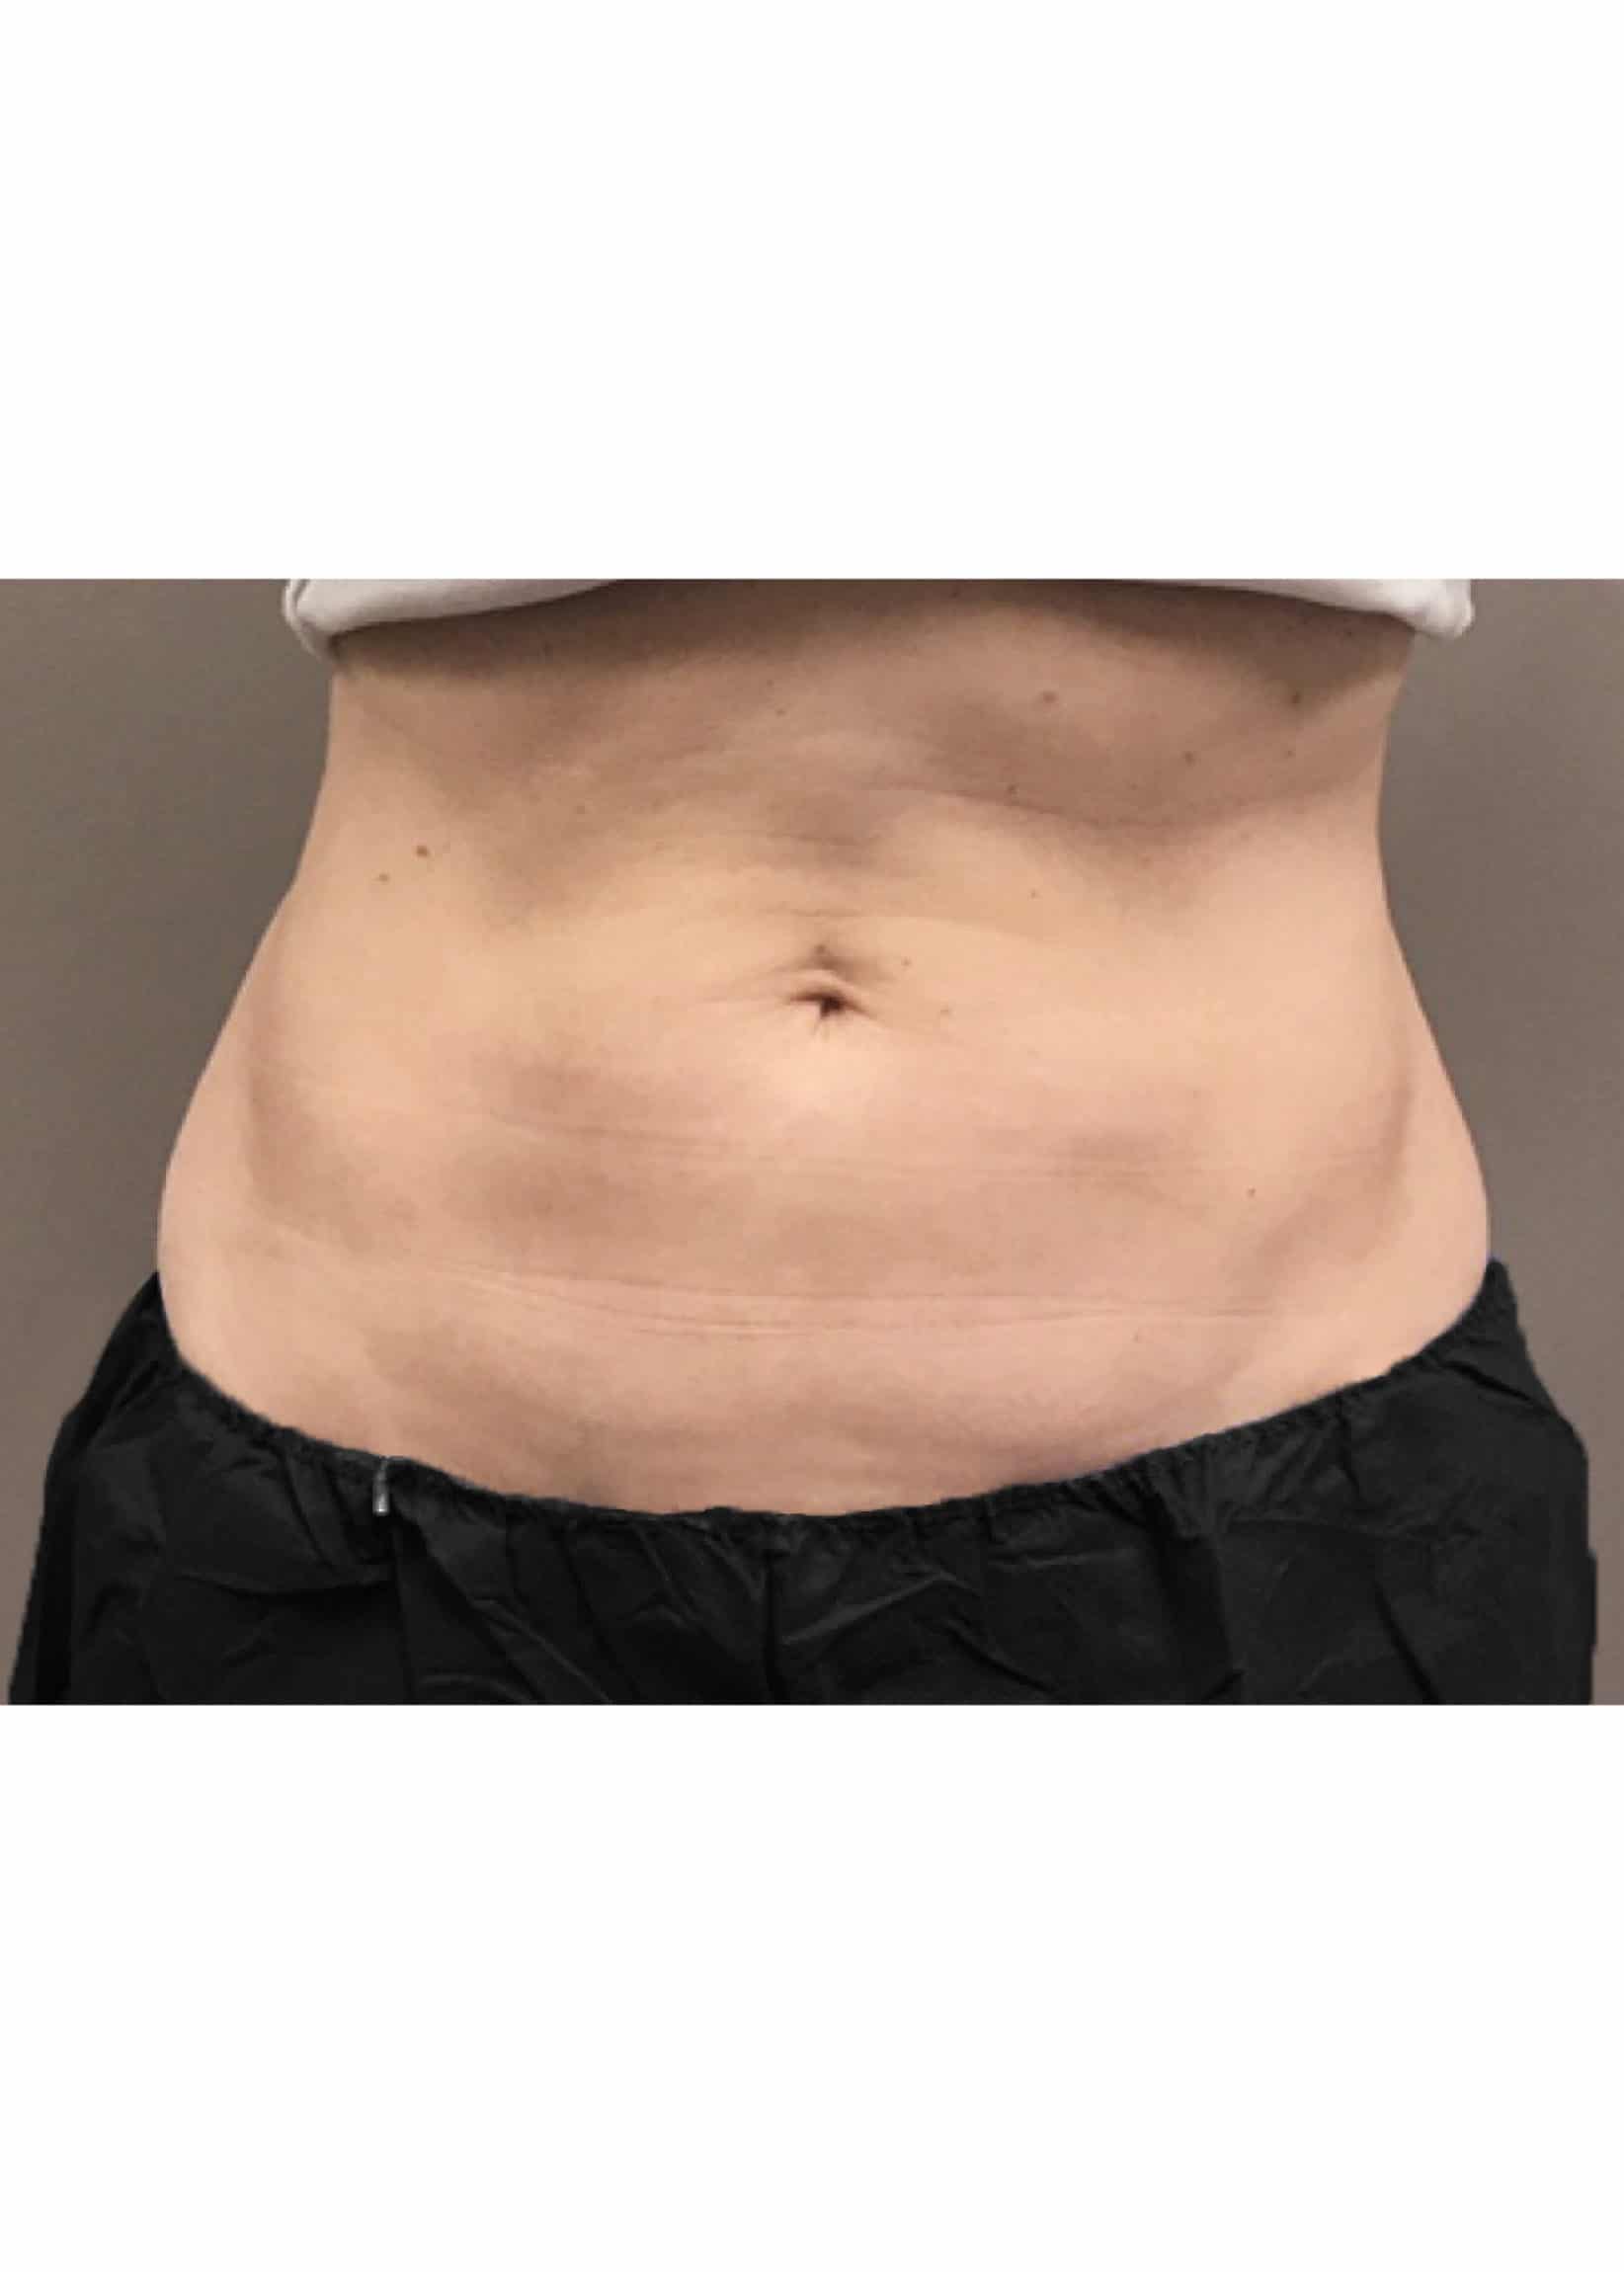 TheSkinCenter ProviderPages BobbiNaples CoolSculpting After 2 scaled 1